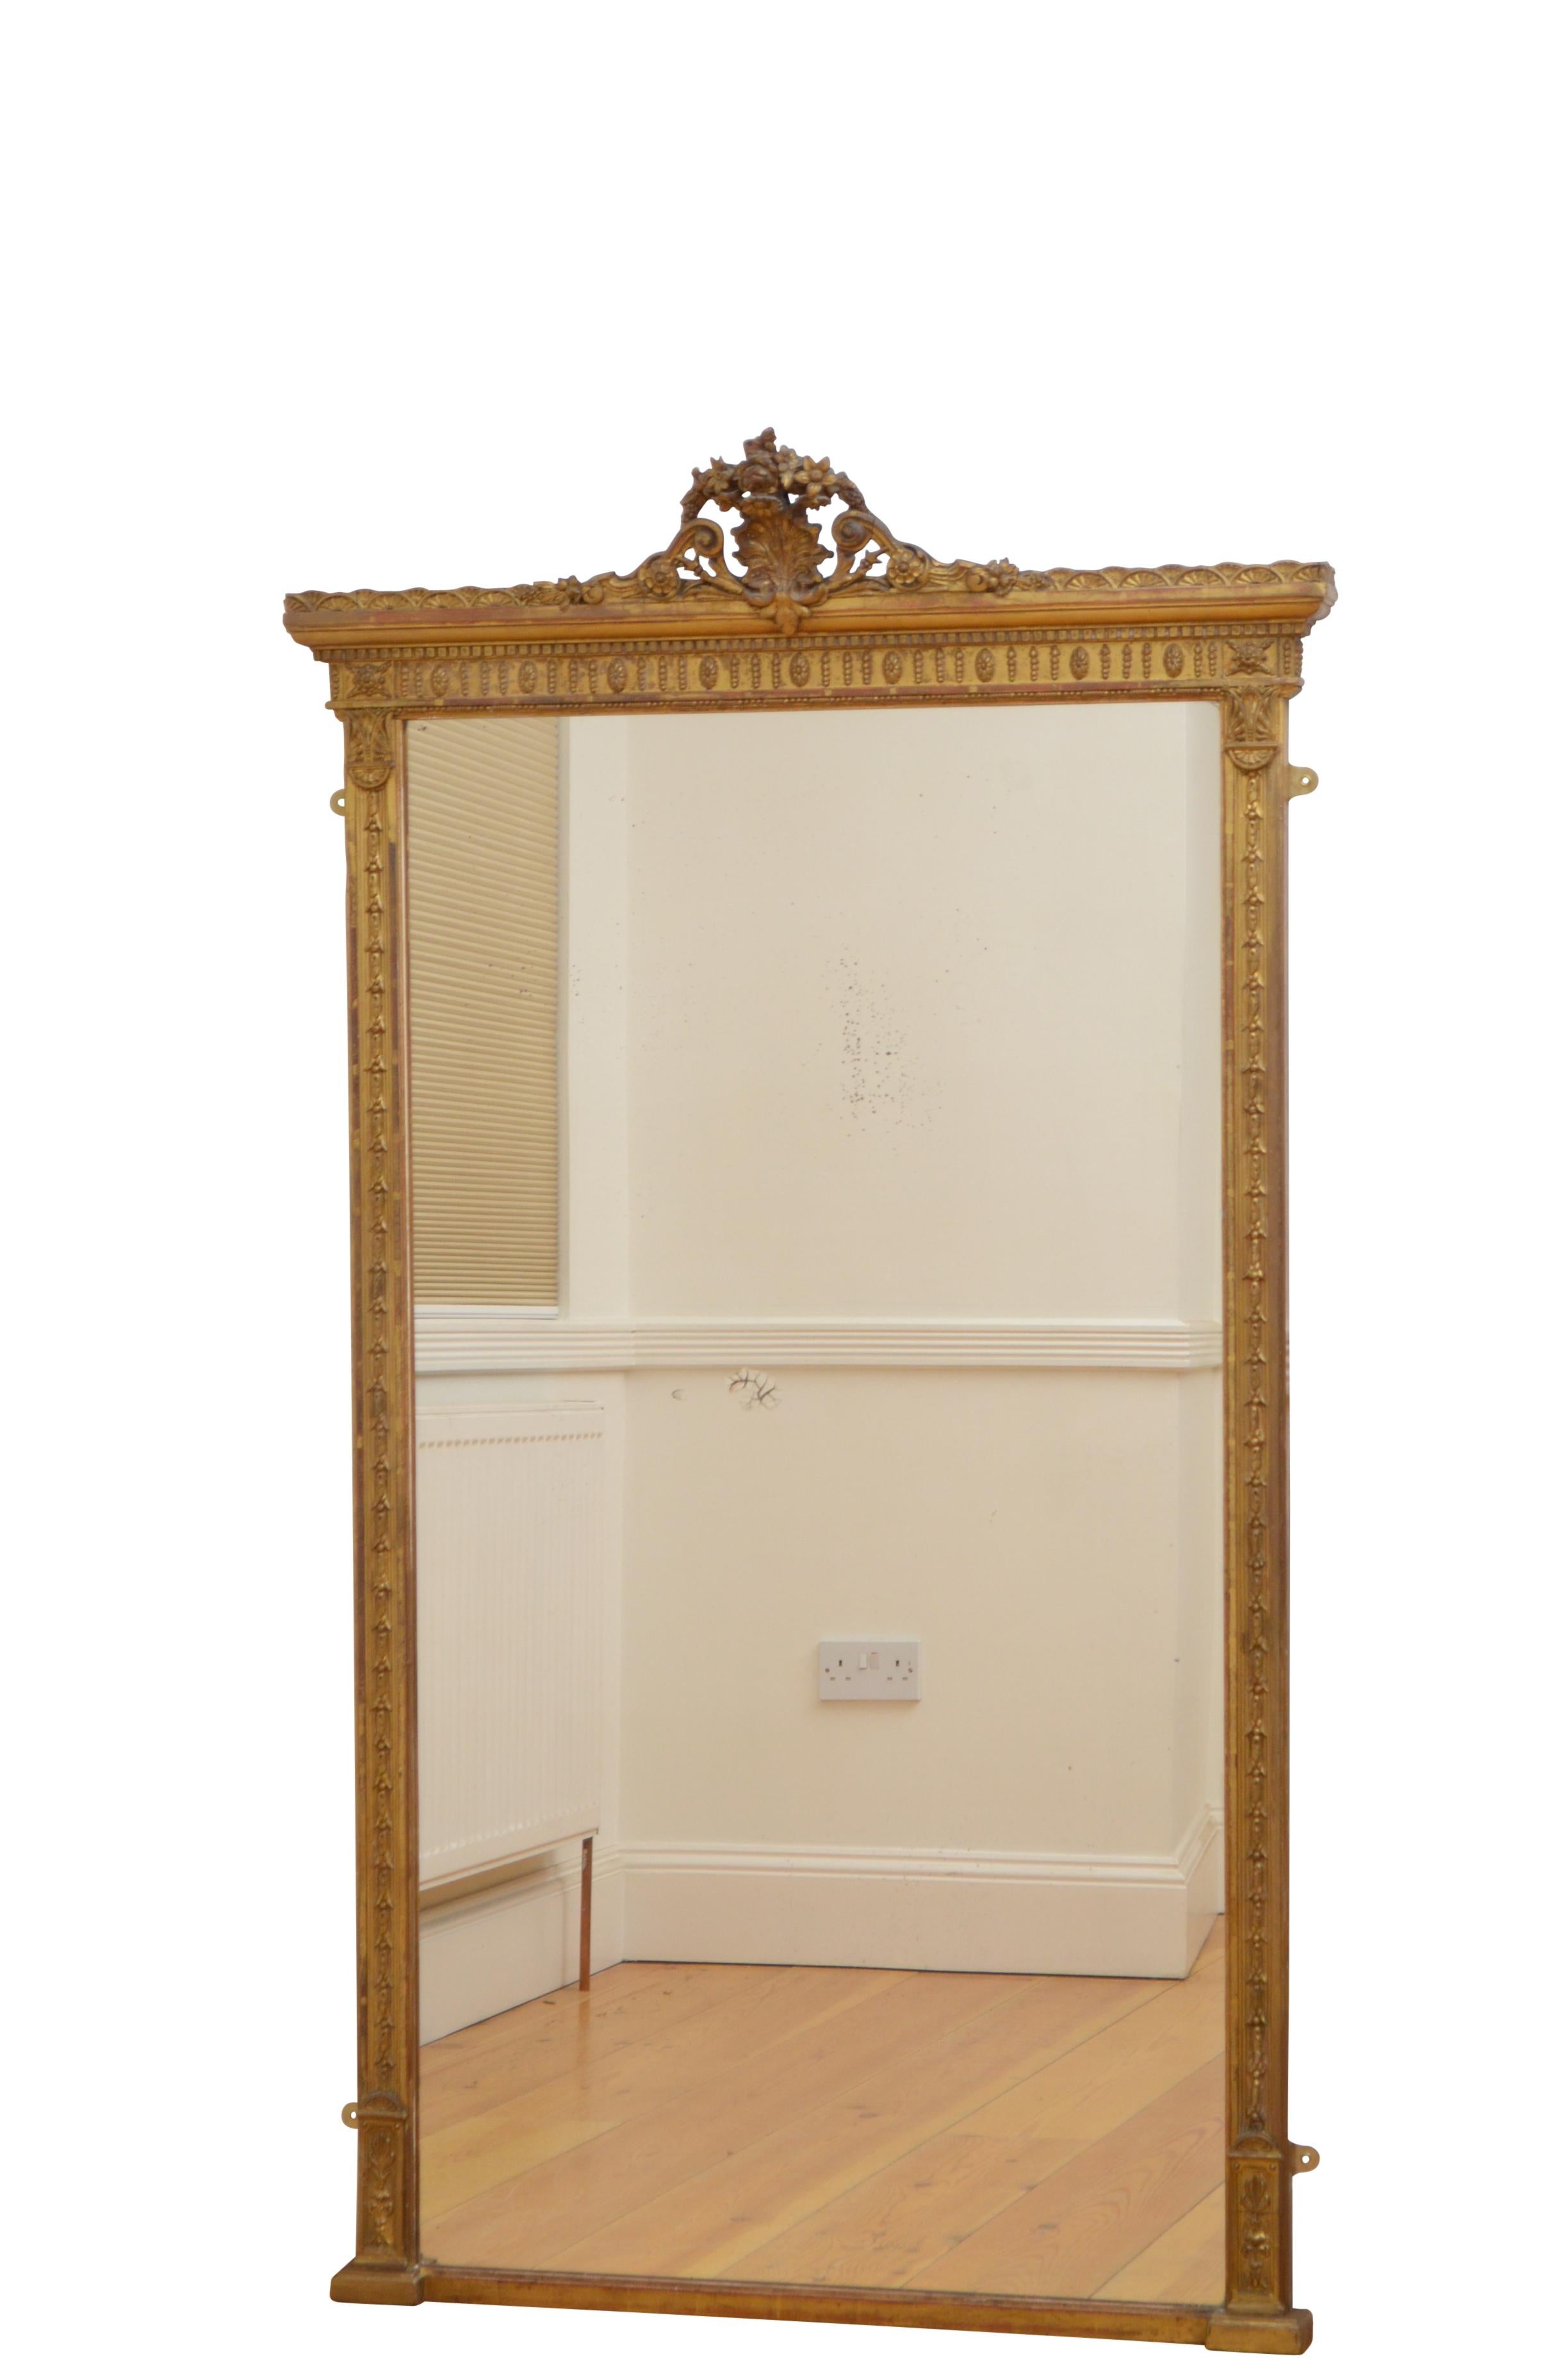 K0419 superb tall and slim Victorian pier giltwood mirror, having original glass with some imperfection in finely hare bells carved and decorated frame with floral centre cresting to the top. This antique mirror retains its original glass, original